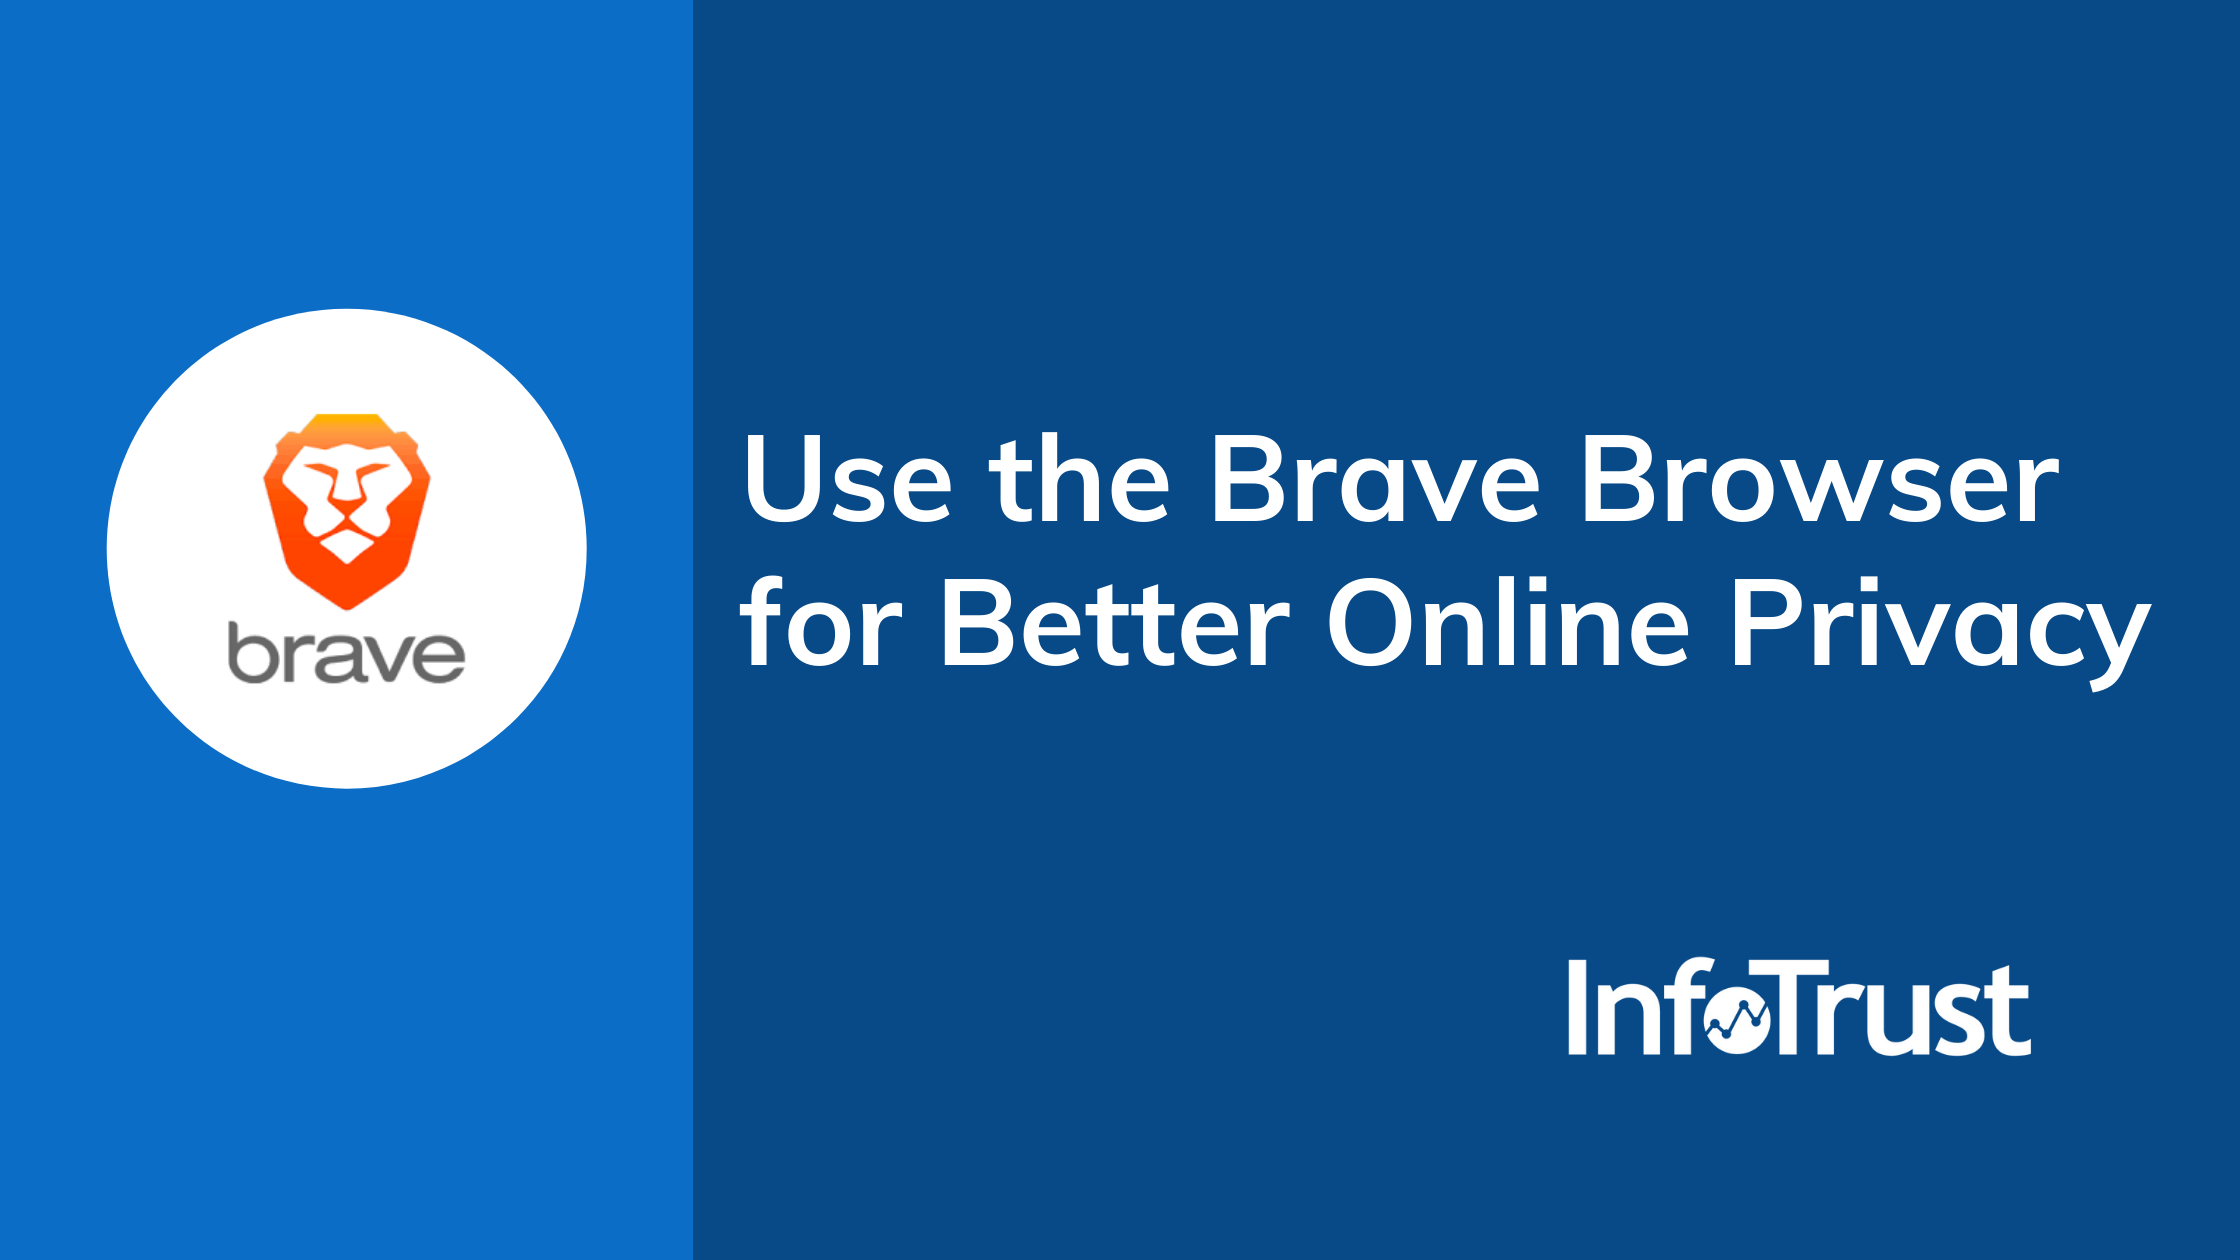 Use the Brave Browser for Better Online Privacy